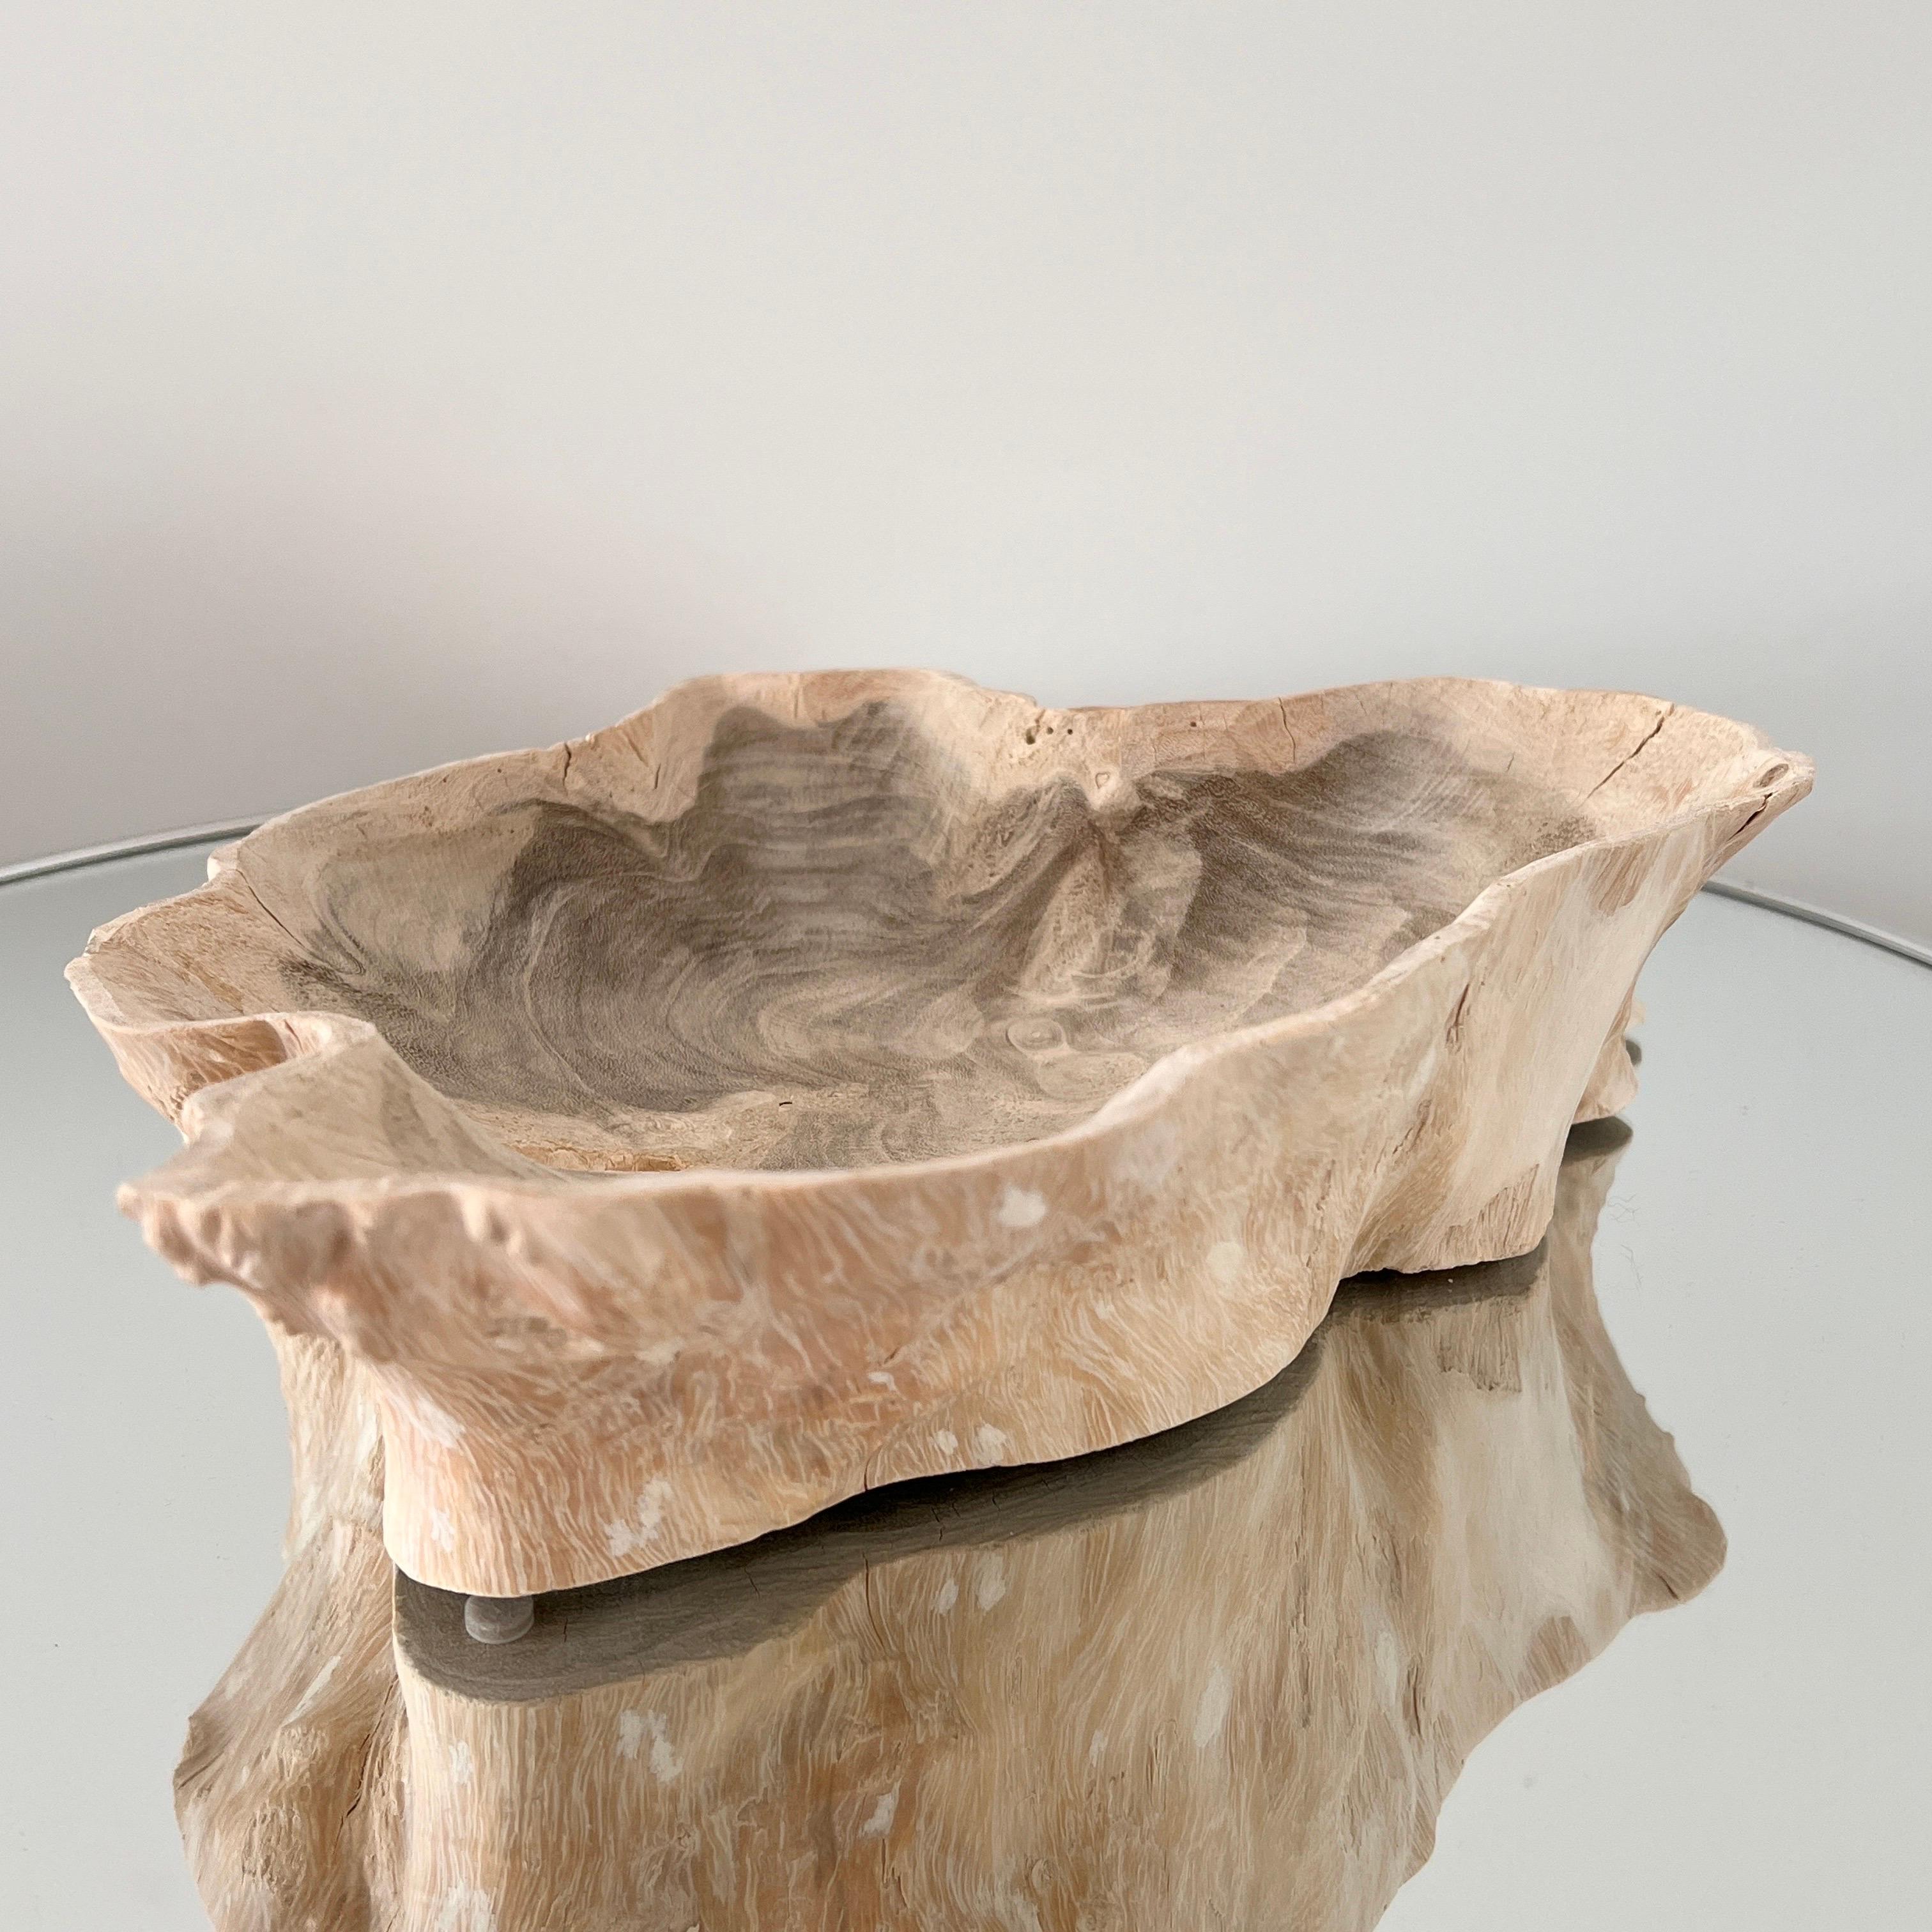 Contemporary Organic Bleached Teak Root Wood Bowl with Live Edges, Indonesia